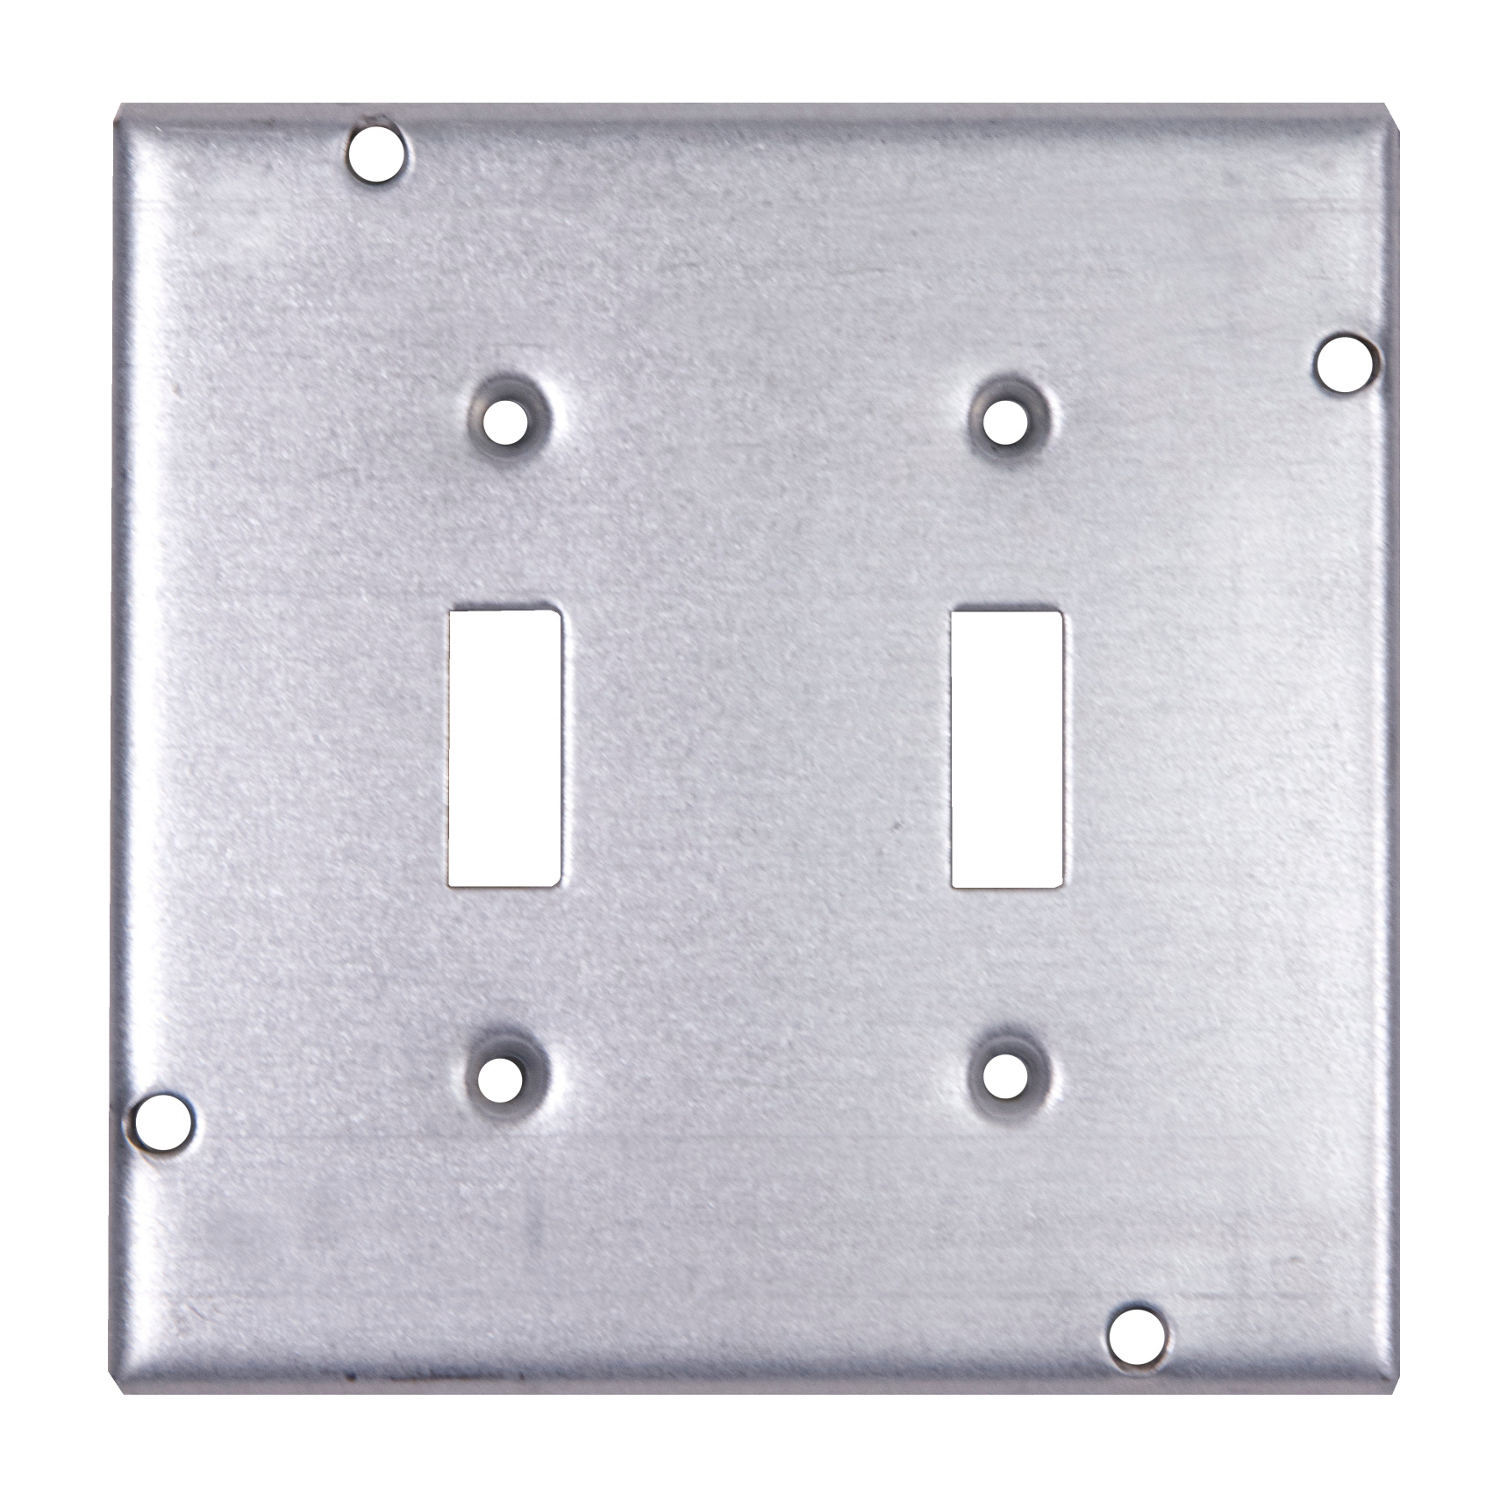 RSL-5 Square Box Surface Cover Steel City;ABB - Installation Products